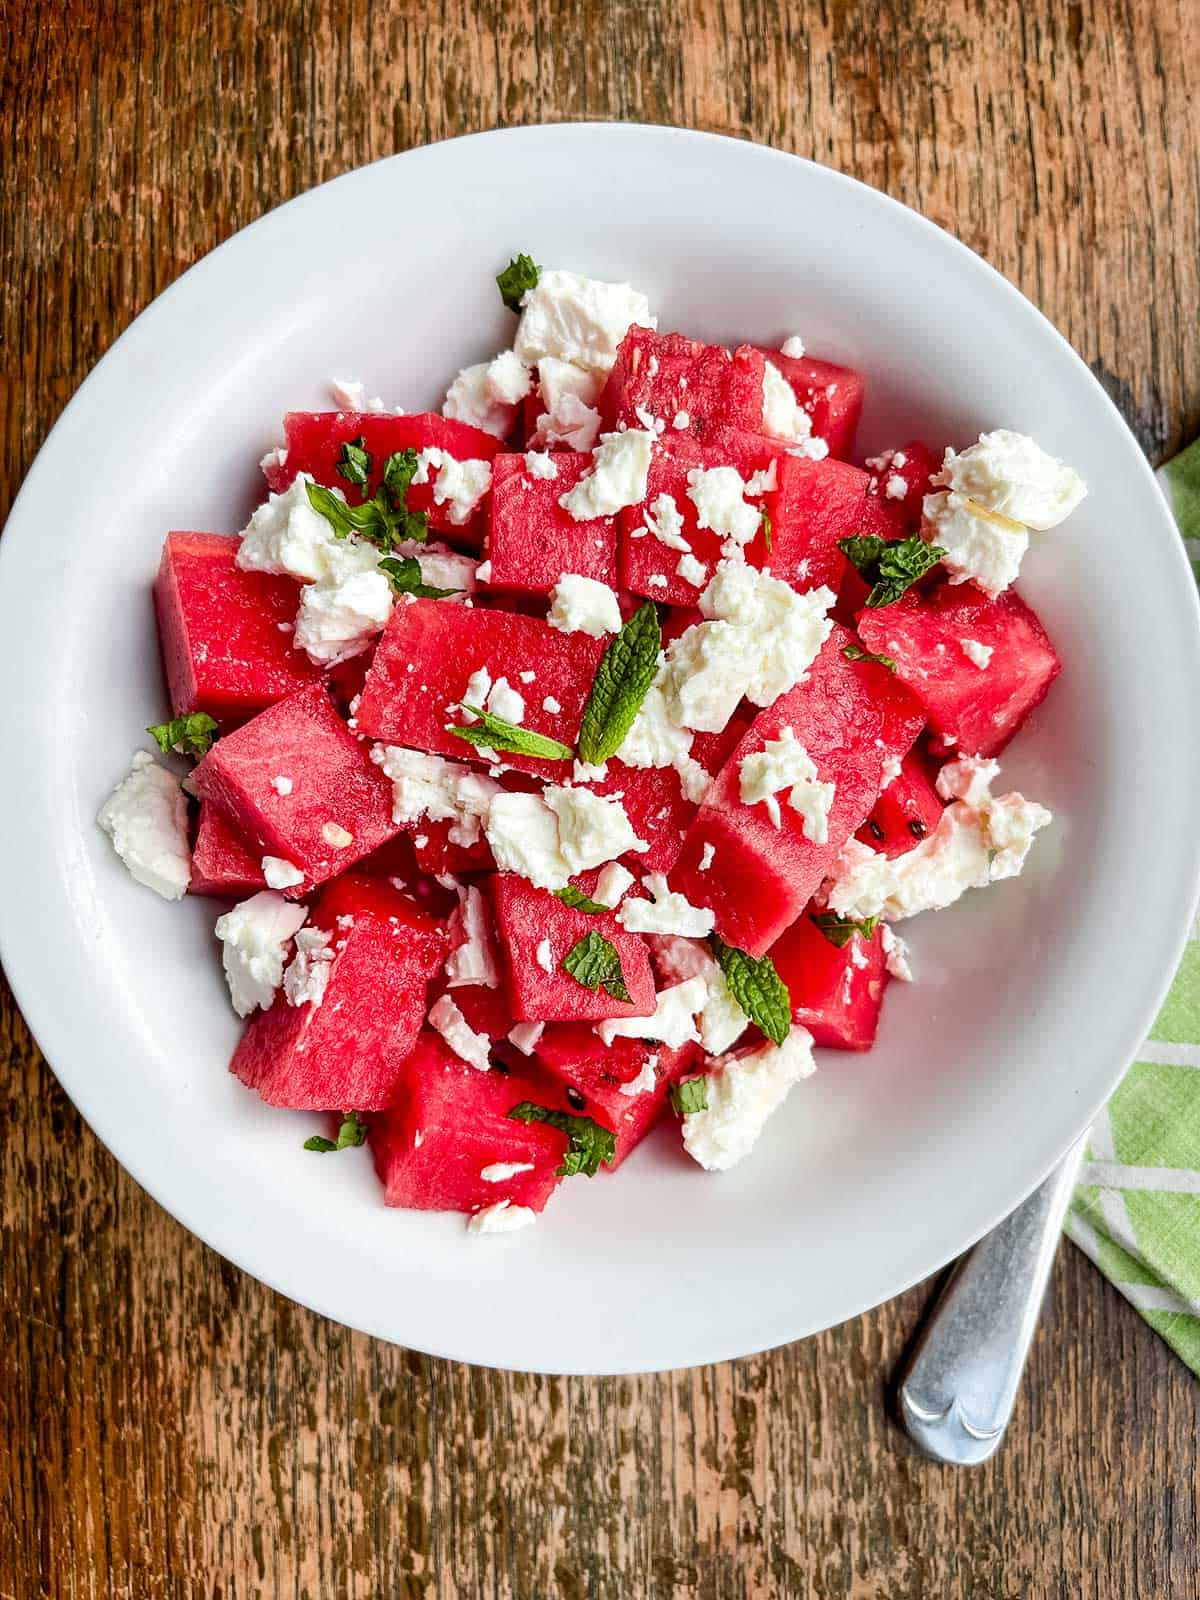 A white bowl of watermelon cubes & crumbled feta cheese on a wooden table.